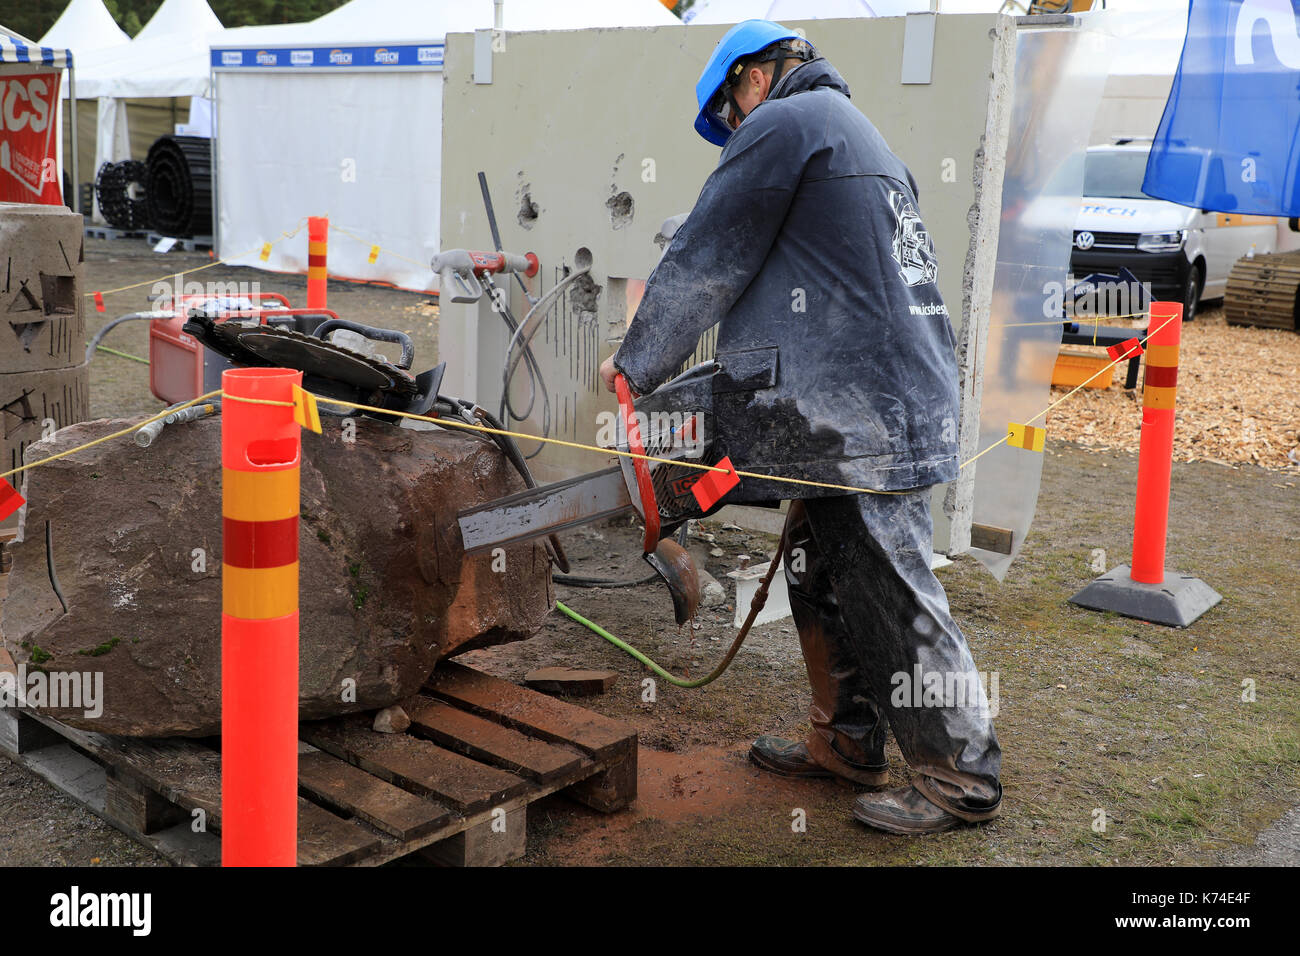 HYVINKAA, FINLAND - SEPTEMBER 8, 2017: Man saws natural granite stone with ICS chain saw on Maxpo 2017. Stock Photo